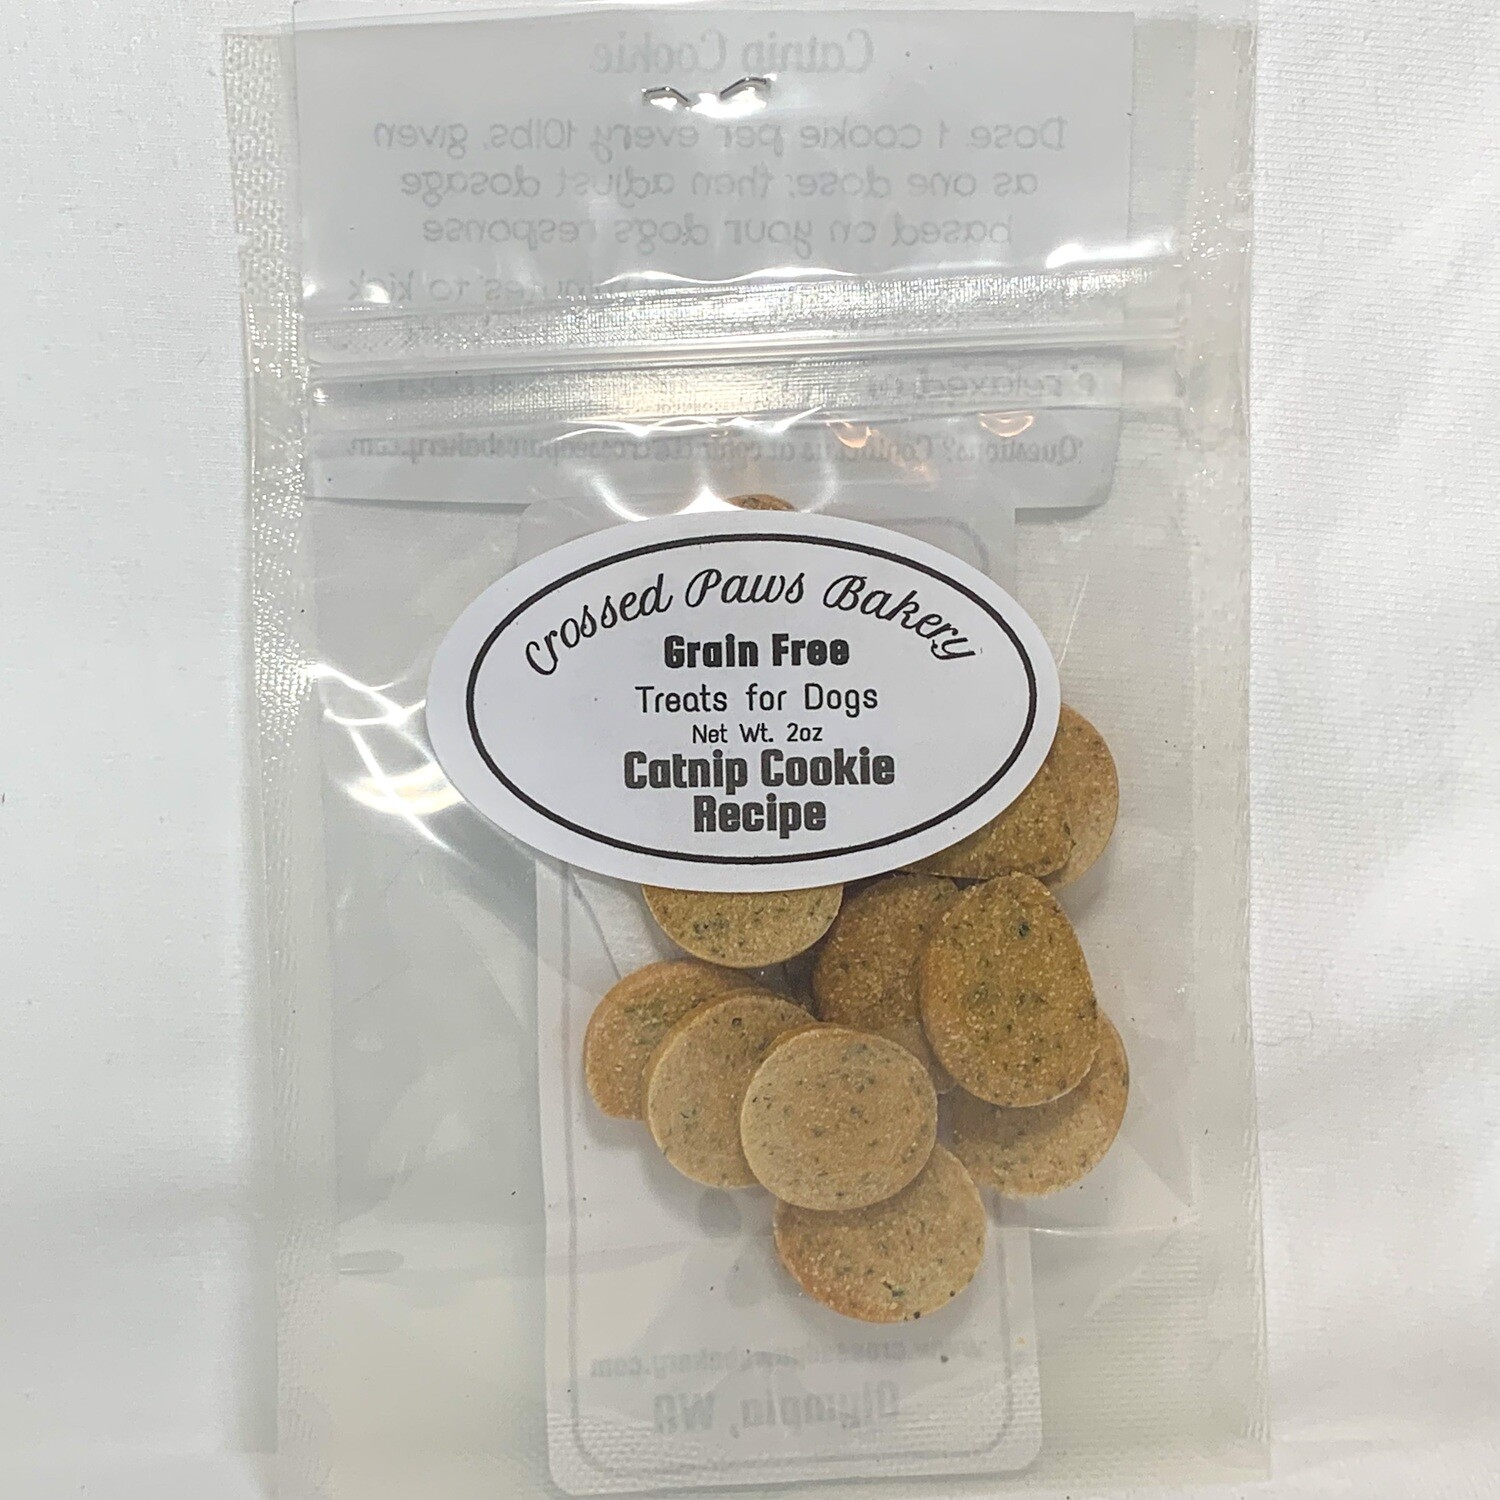 Catnip Cookies (Doggy Downers)